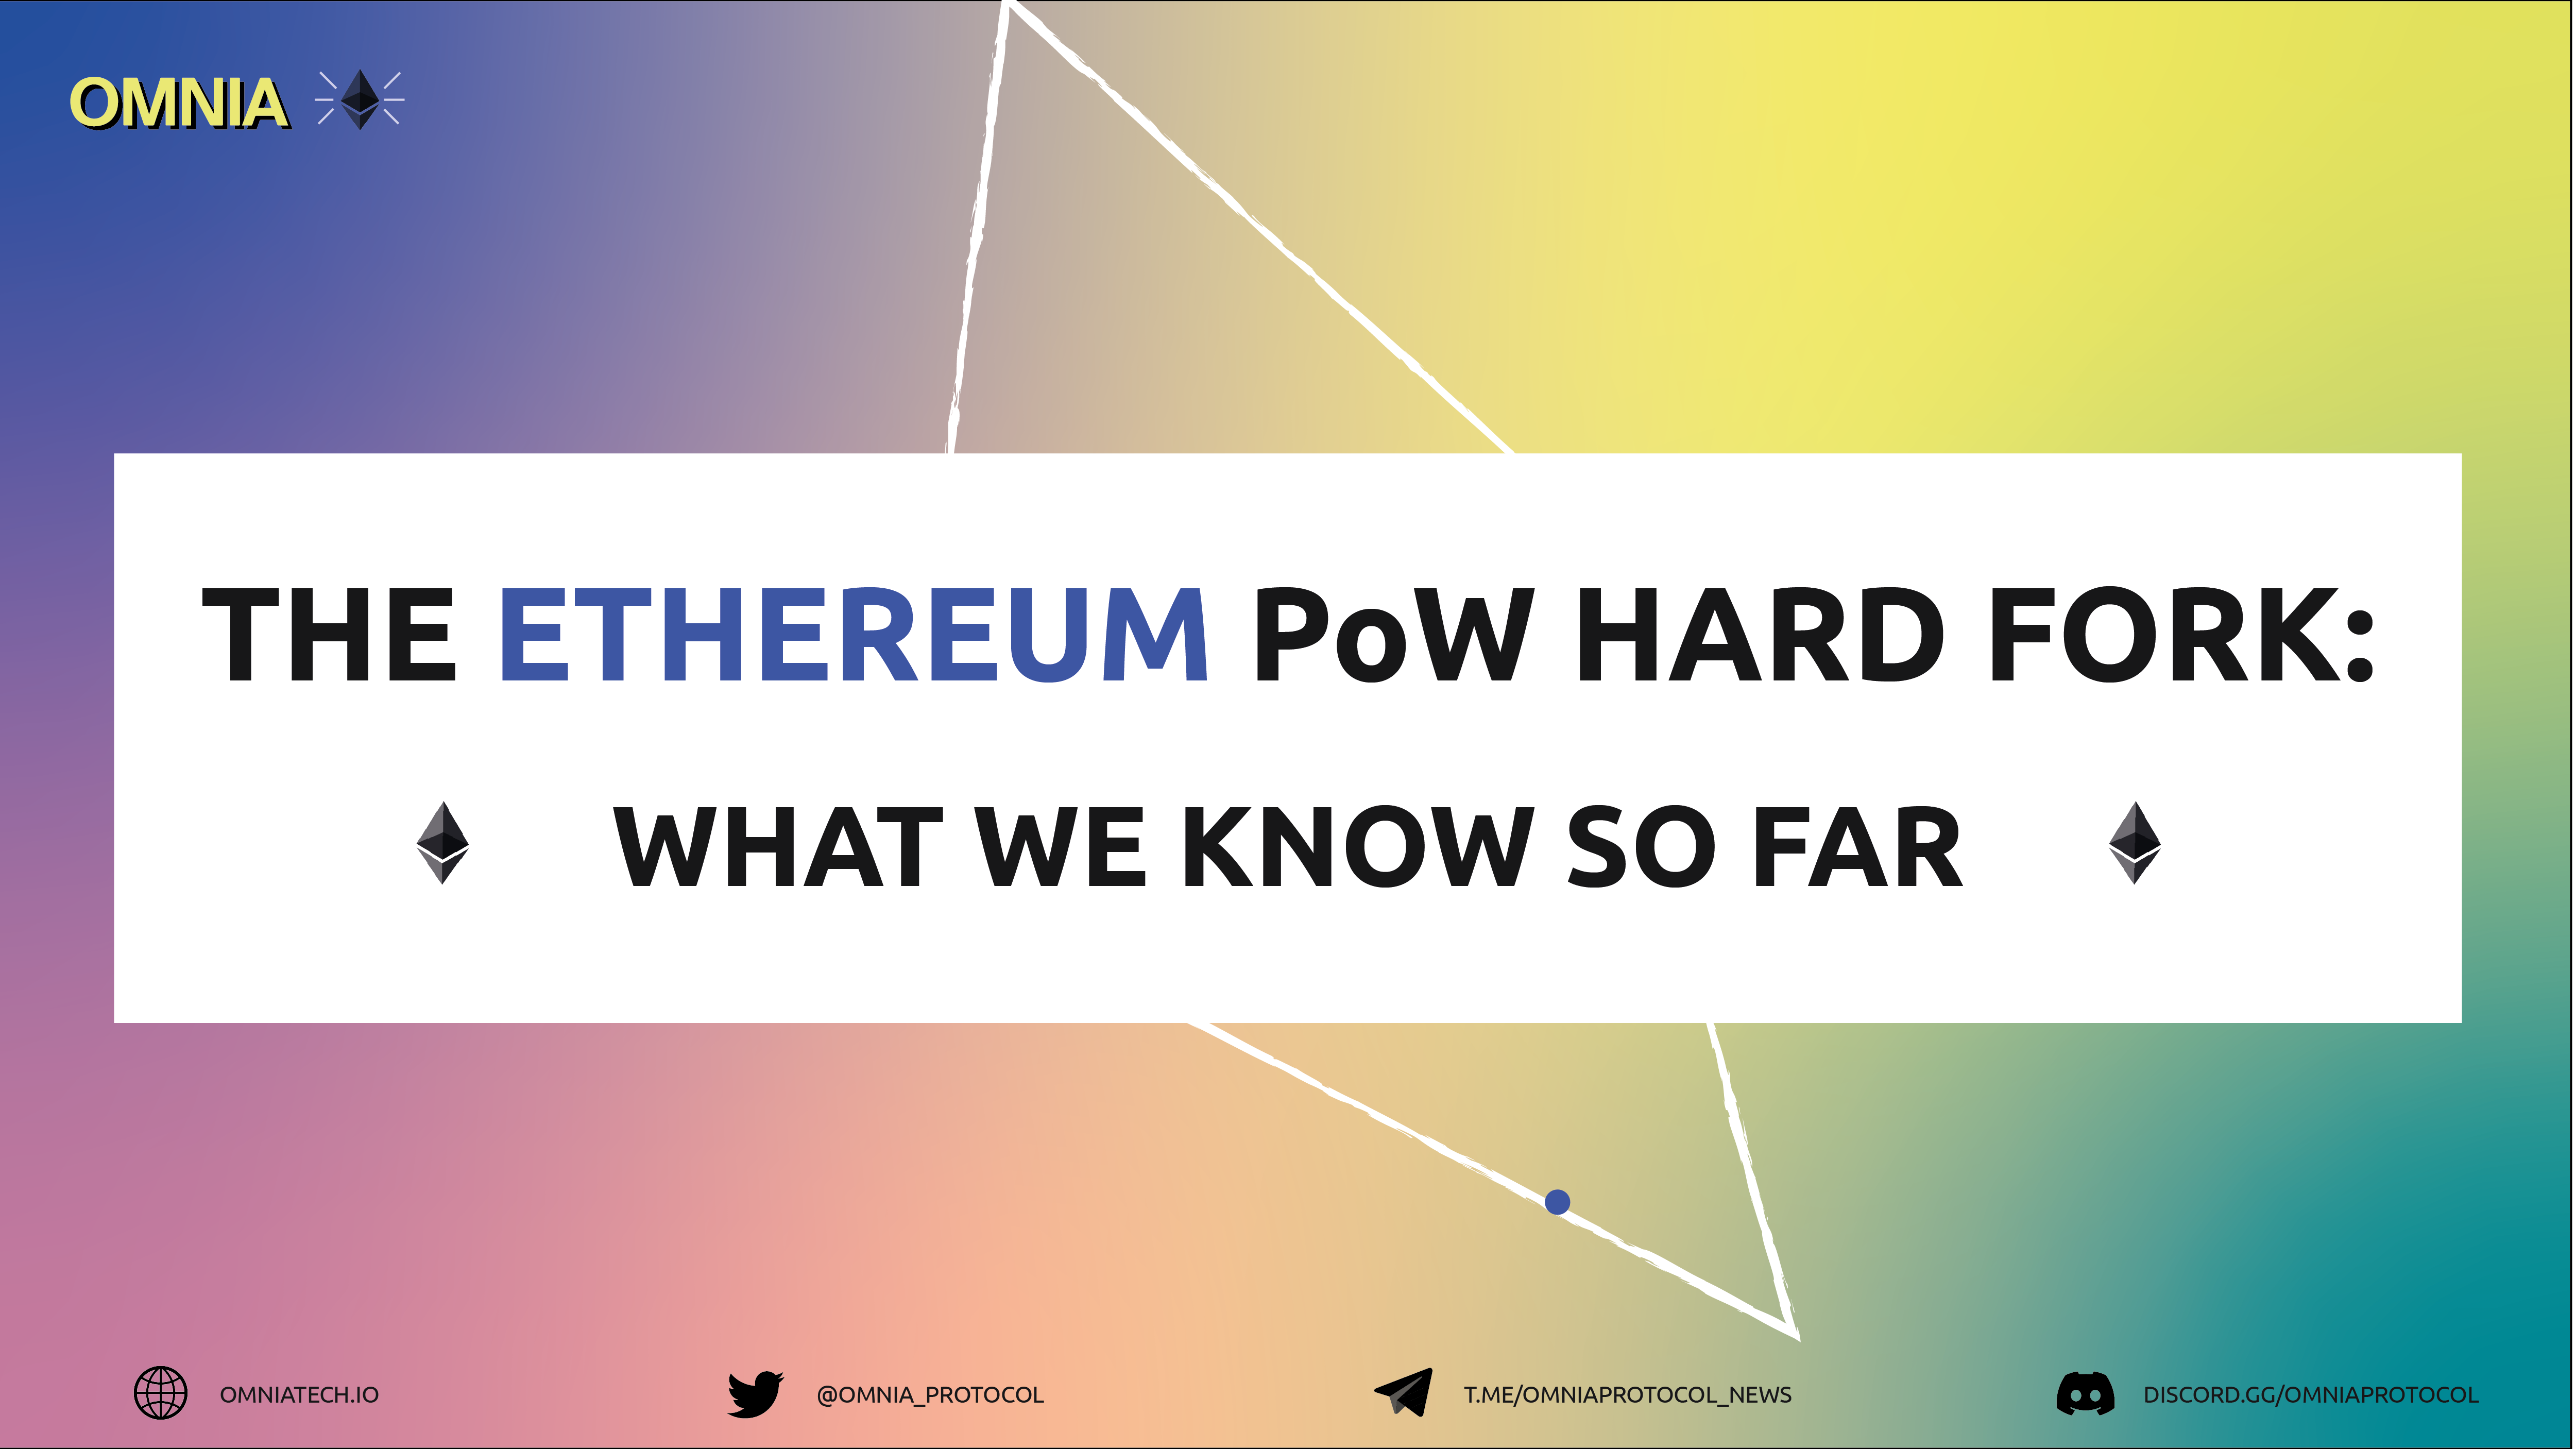 The Ethereum PoW Hard Fork: What We Know So Far